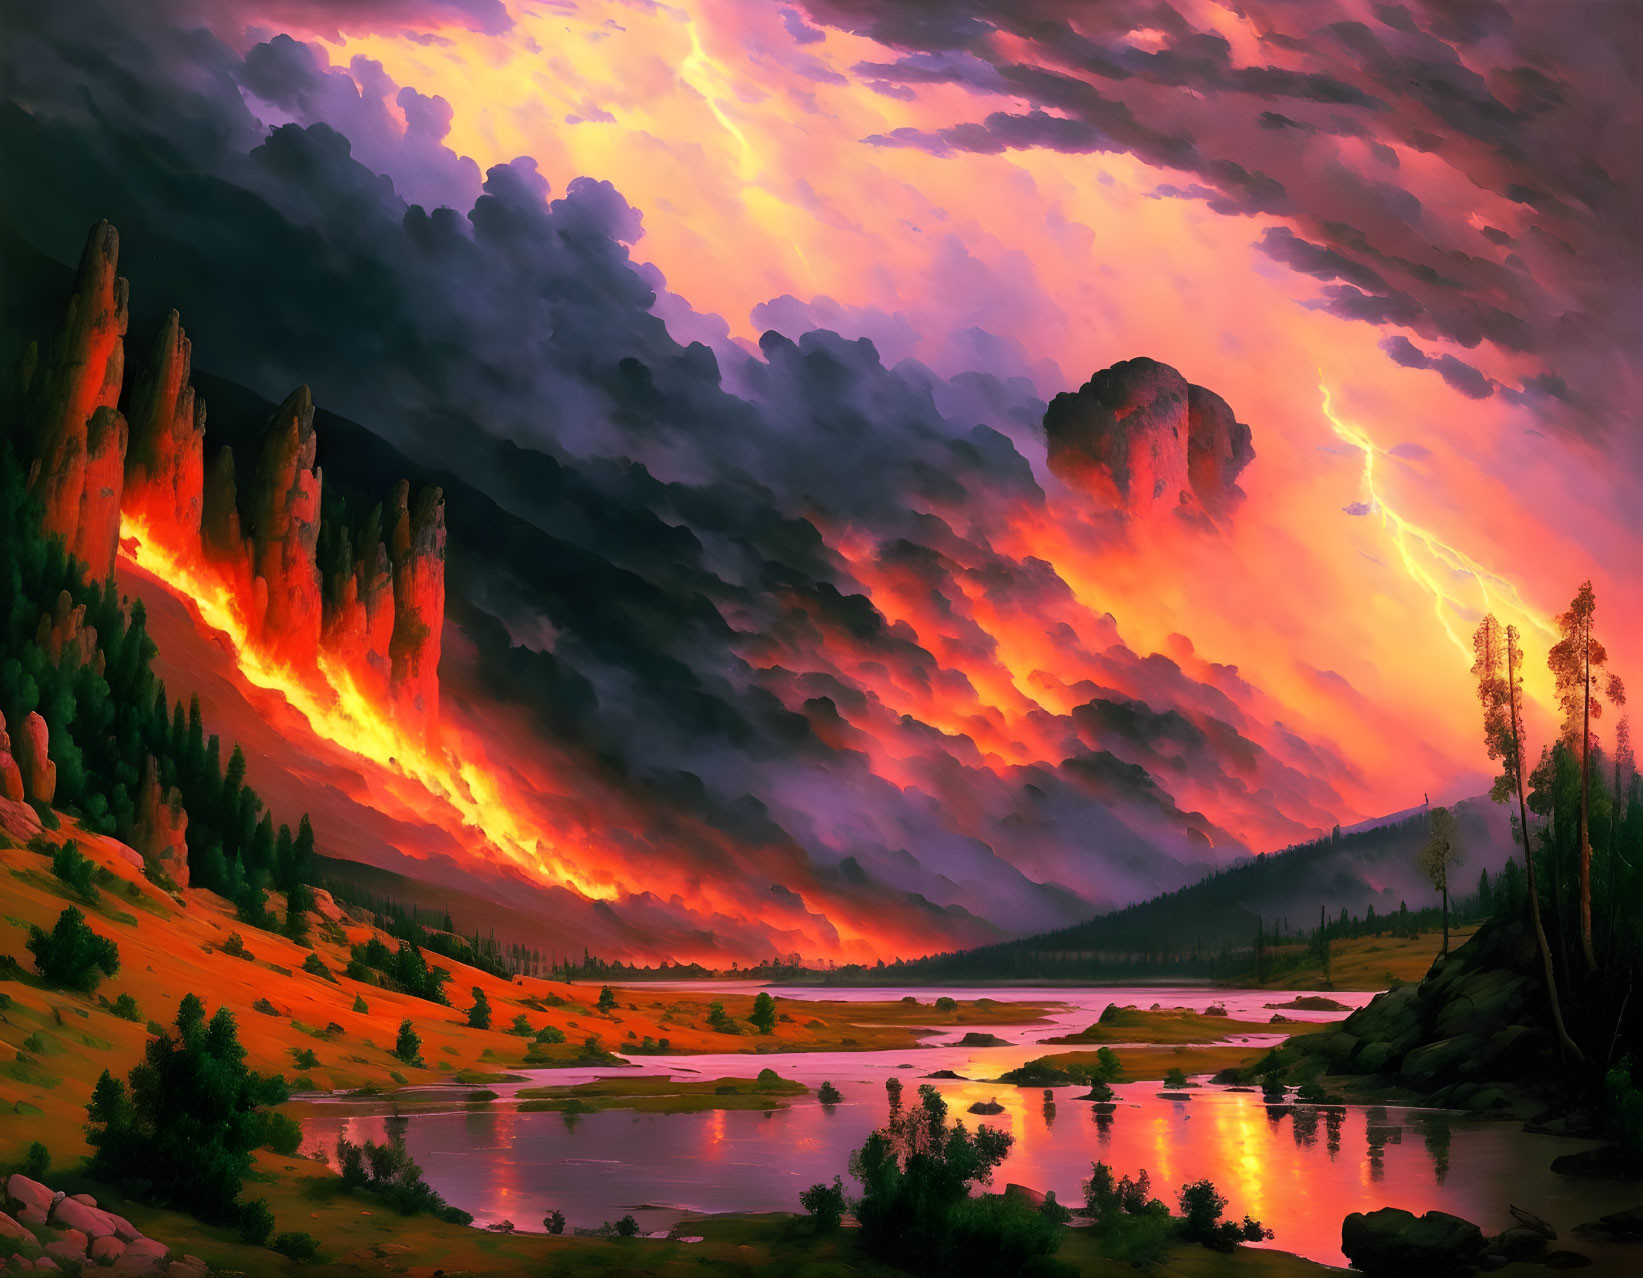 Dramatic landscape with fiery sky, rock formations, river, greenery